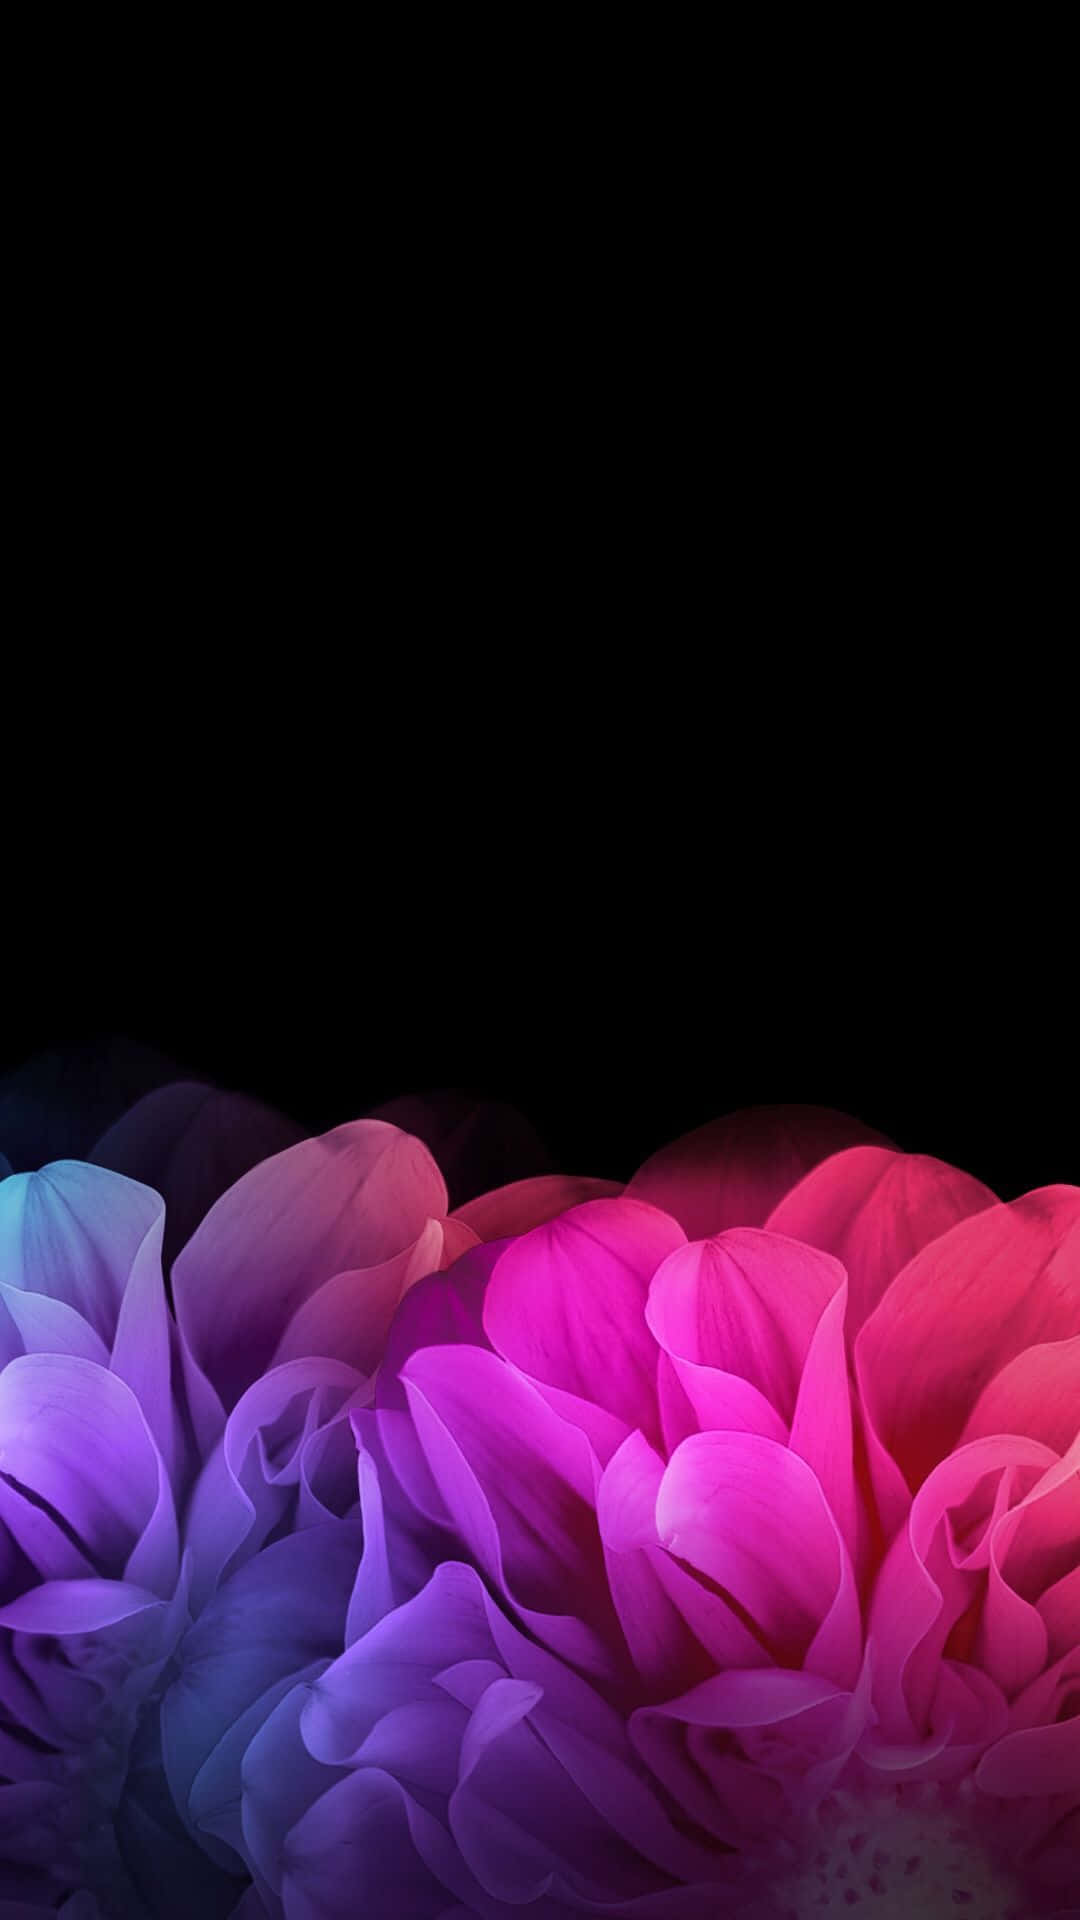 A Black Background With Colorful Flowers Wallpaper